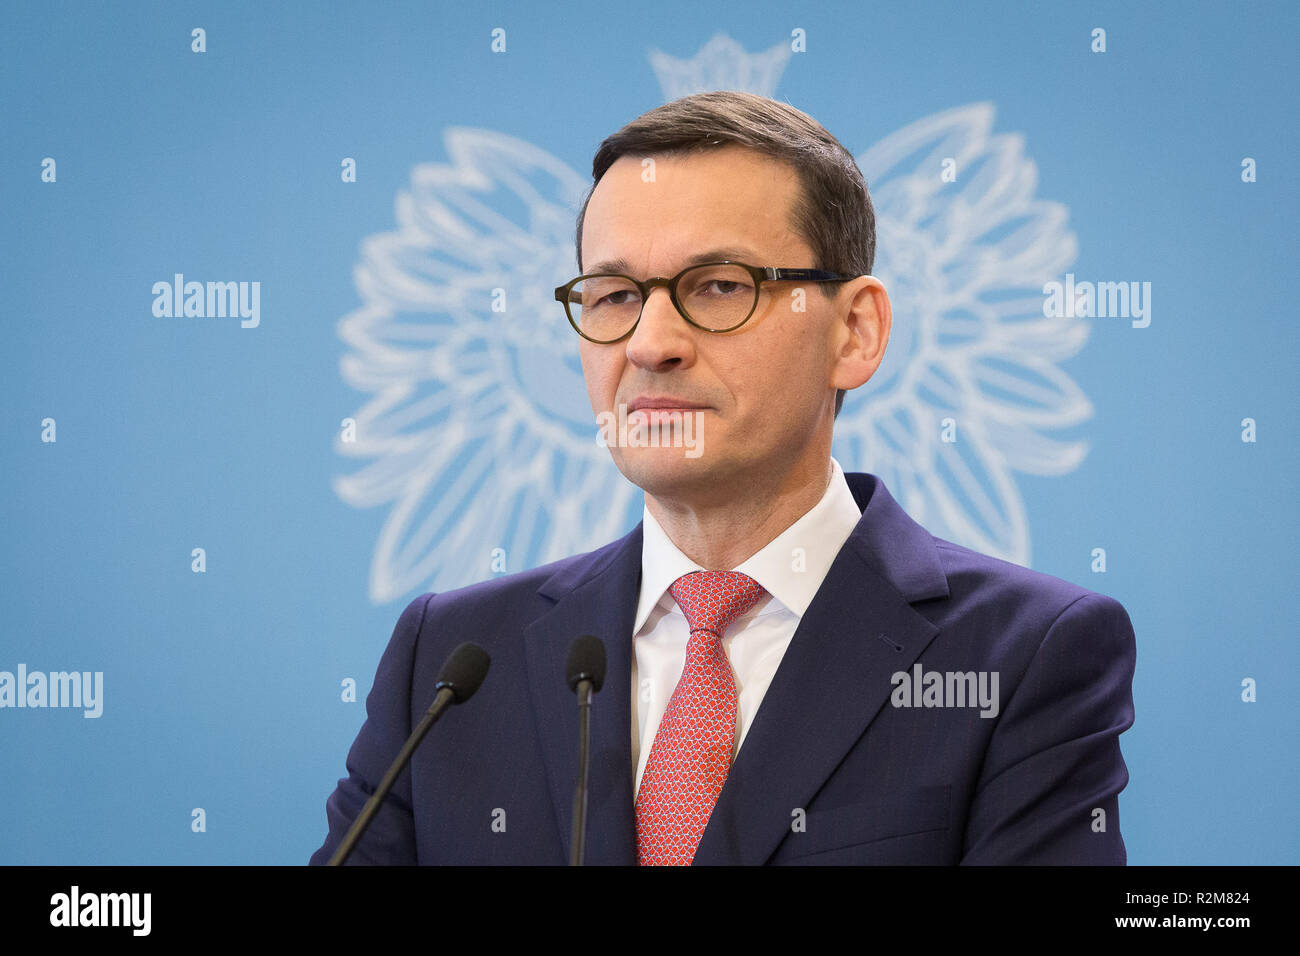 Prime Minister of Poland Mateusz Morawiecki during the press conference at Chancellery of the Prime Minister in Warsaw, Poland on 12 March 2018 Stock Photo